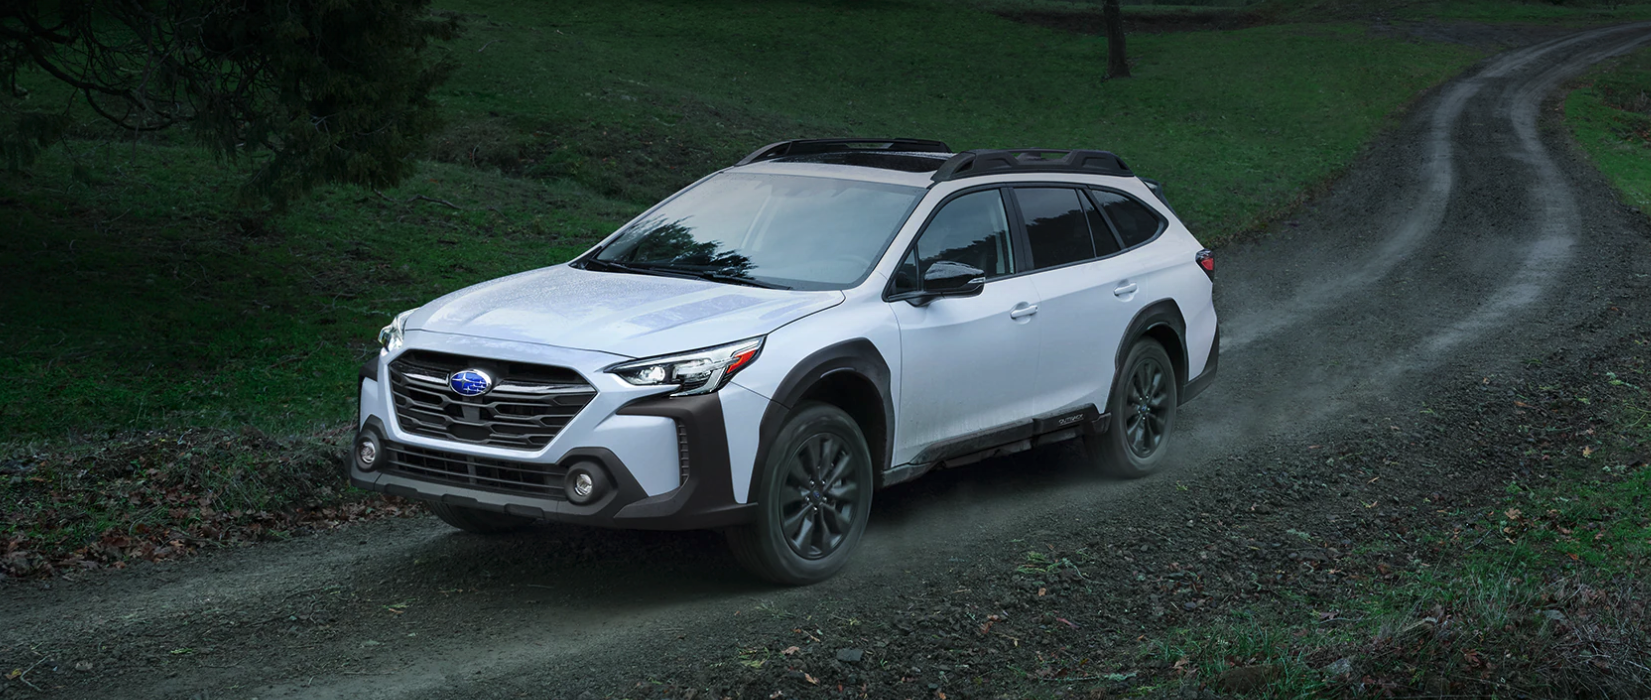 Test Drive The New 2023 Subaru Outback SUV For Free At This Oklahoma City Dealer